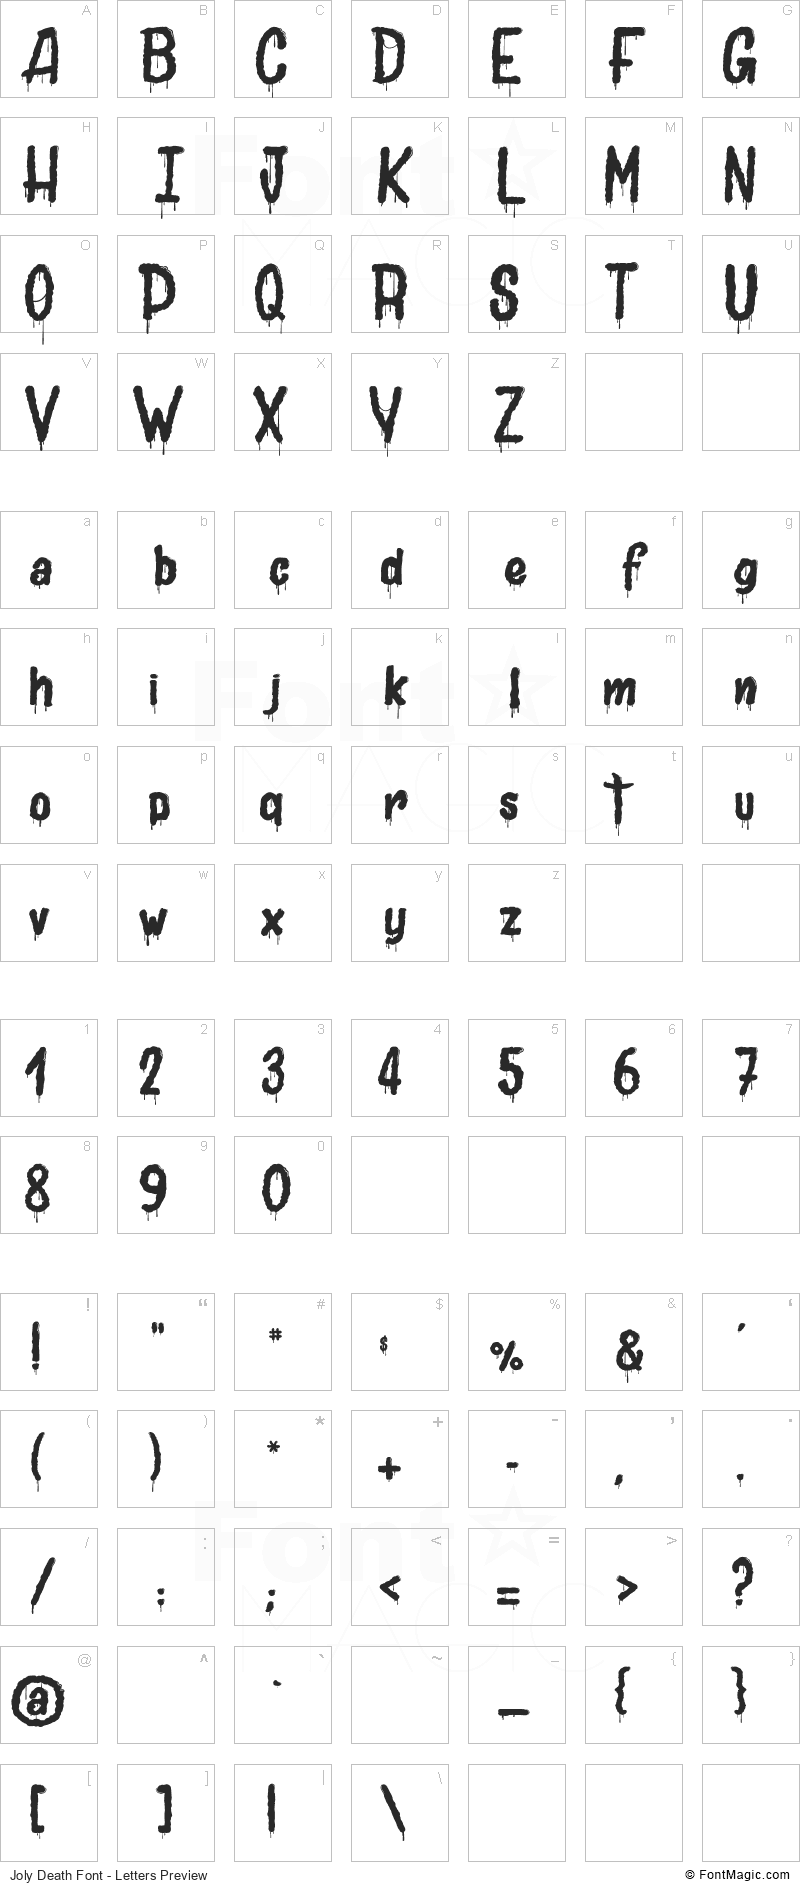 Joly Death Font - All Latters Preview Chart